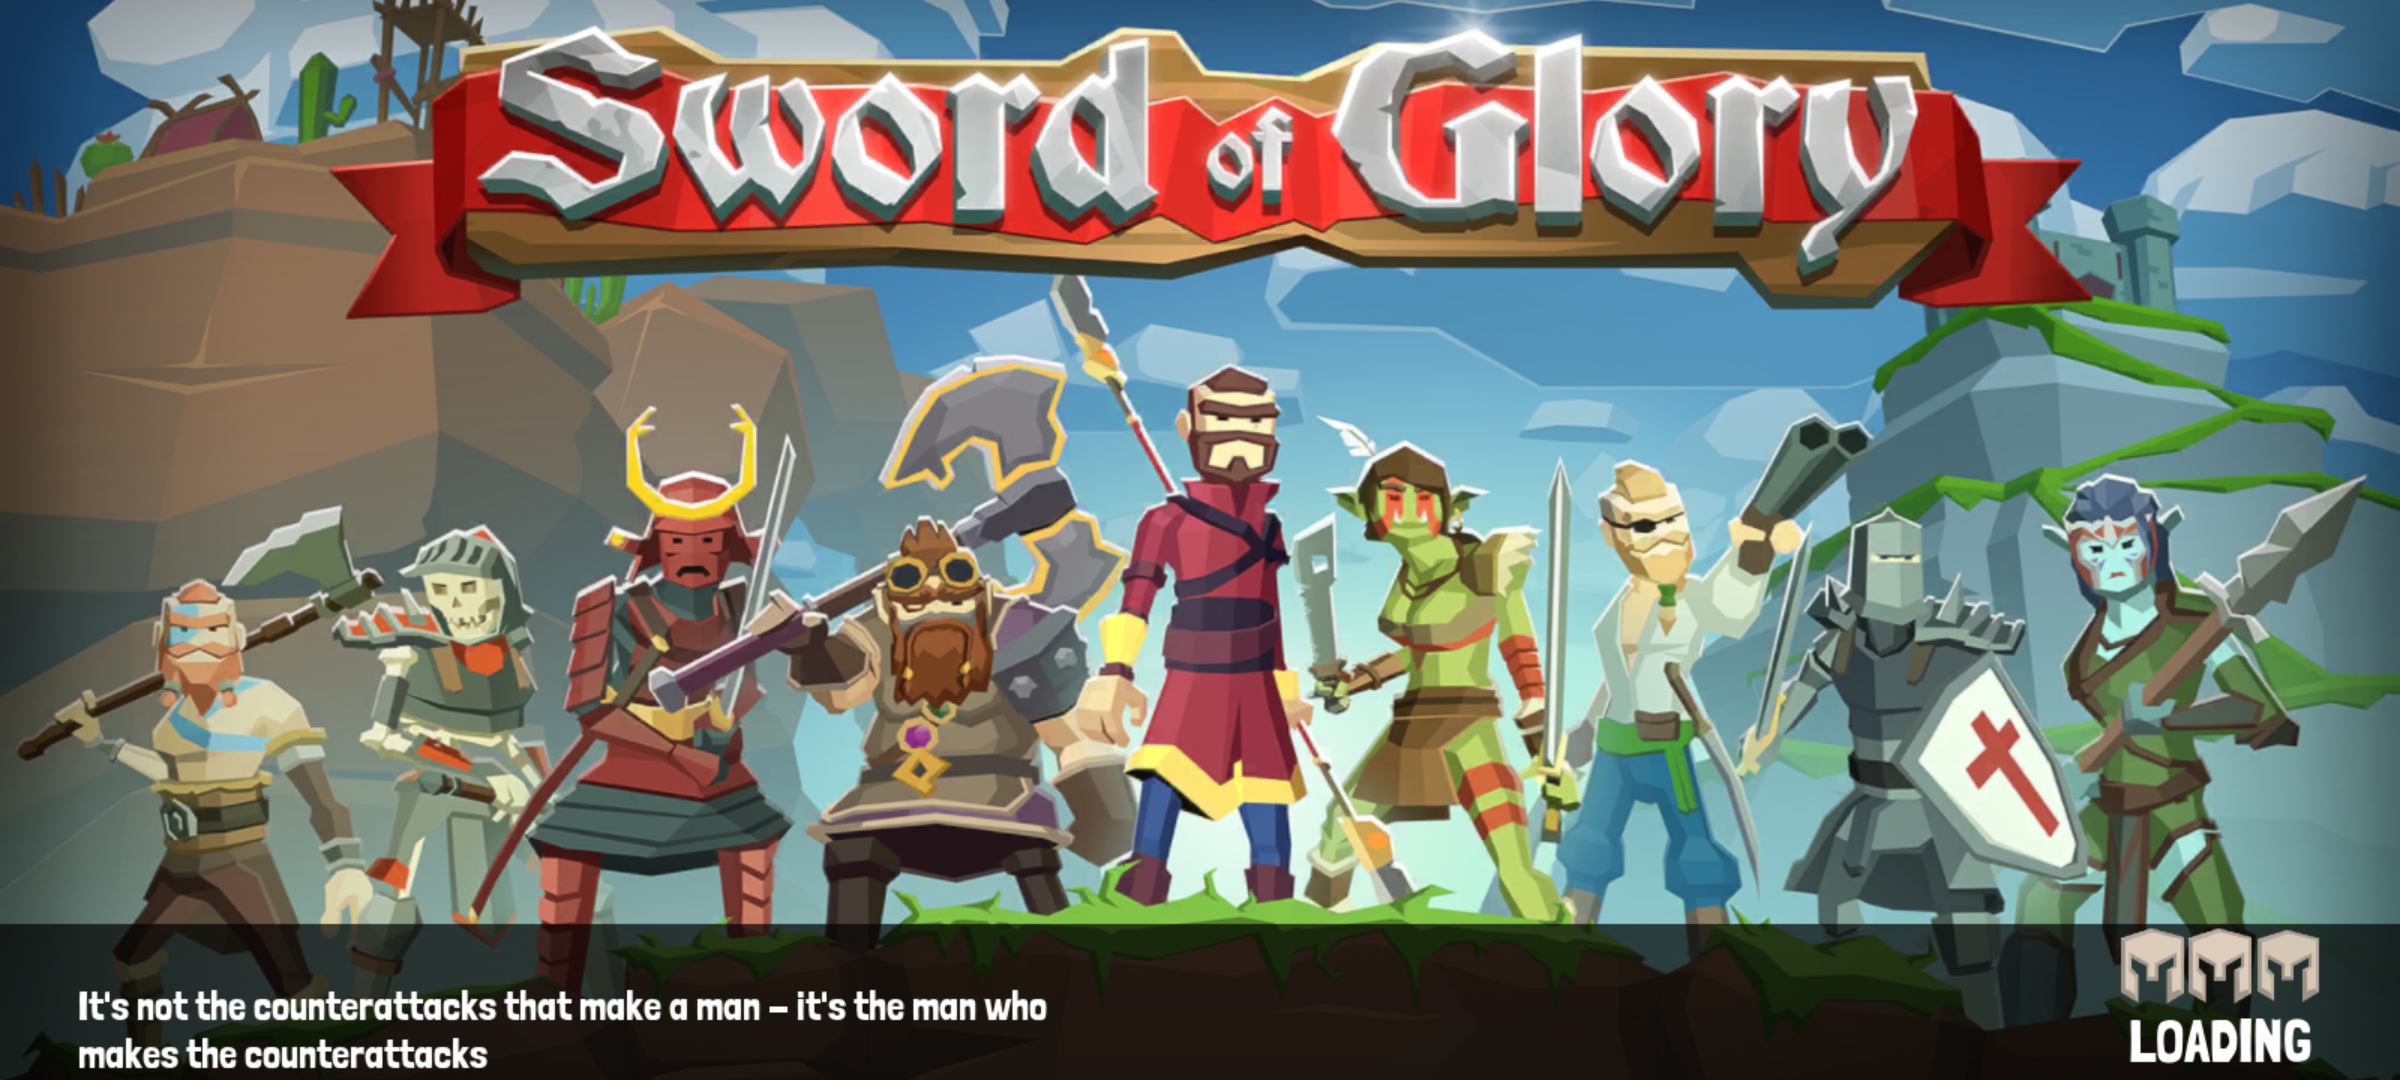 Game Sword of Glory Skill Based RPG Cho Android